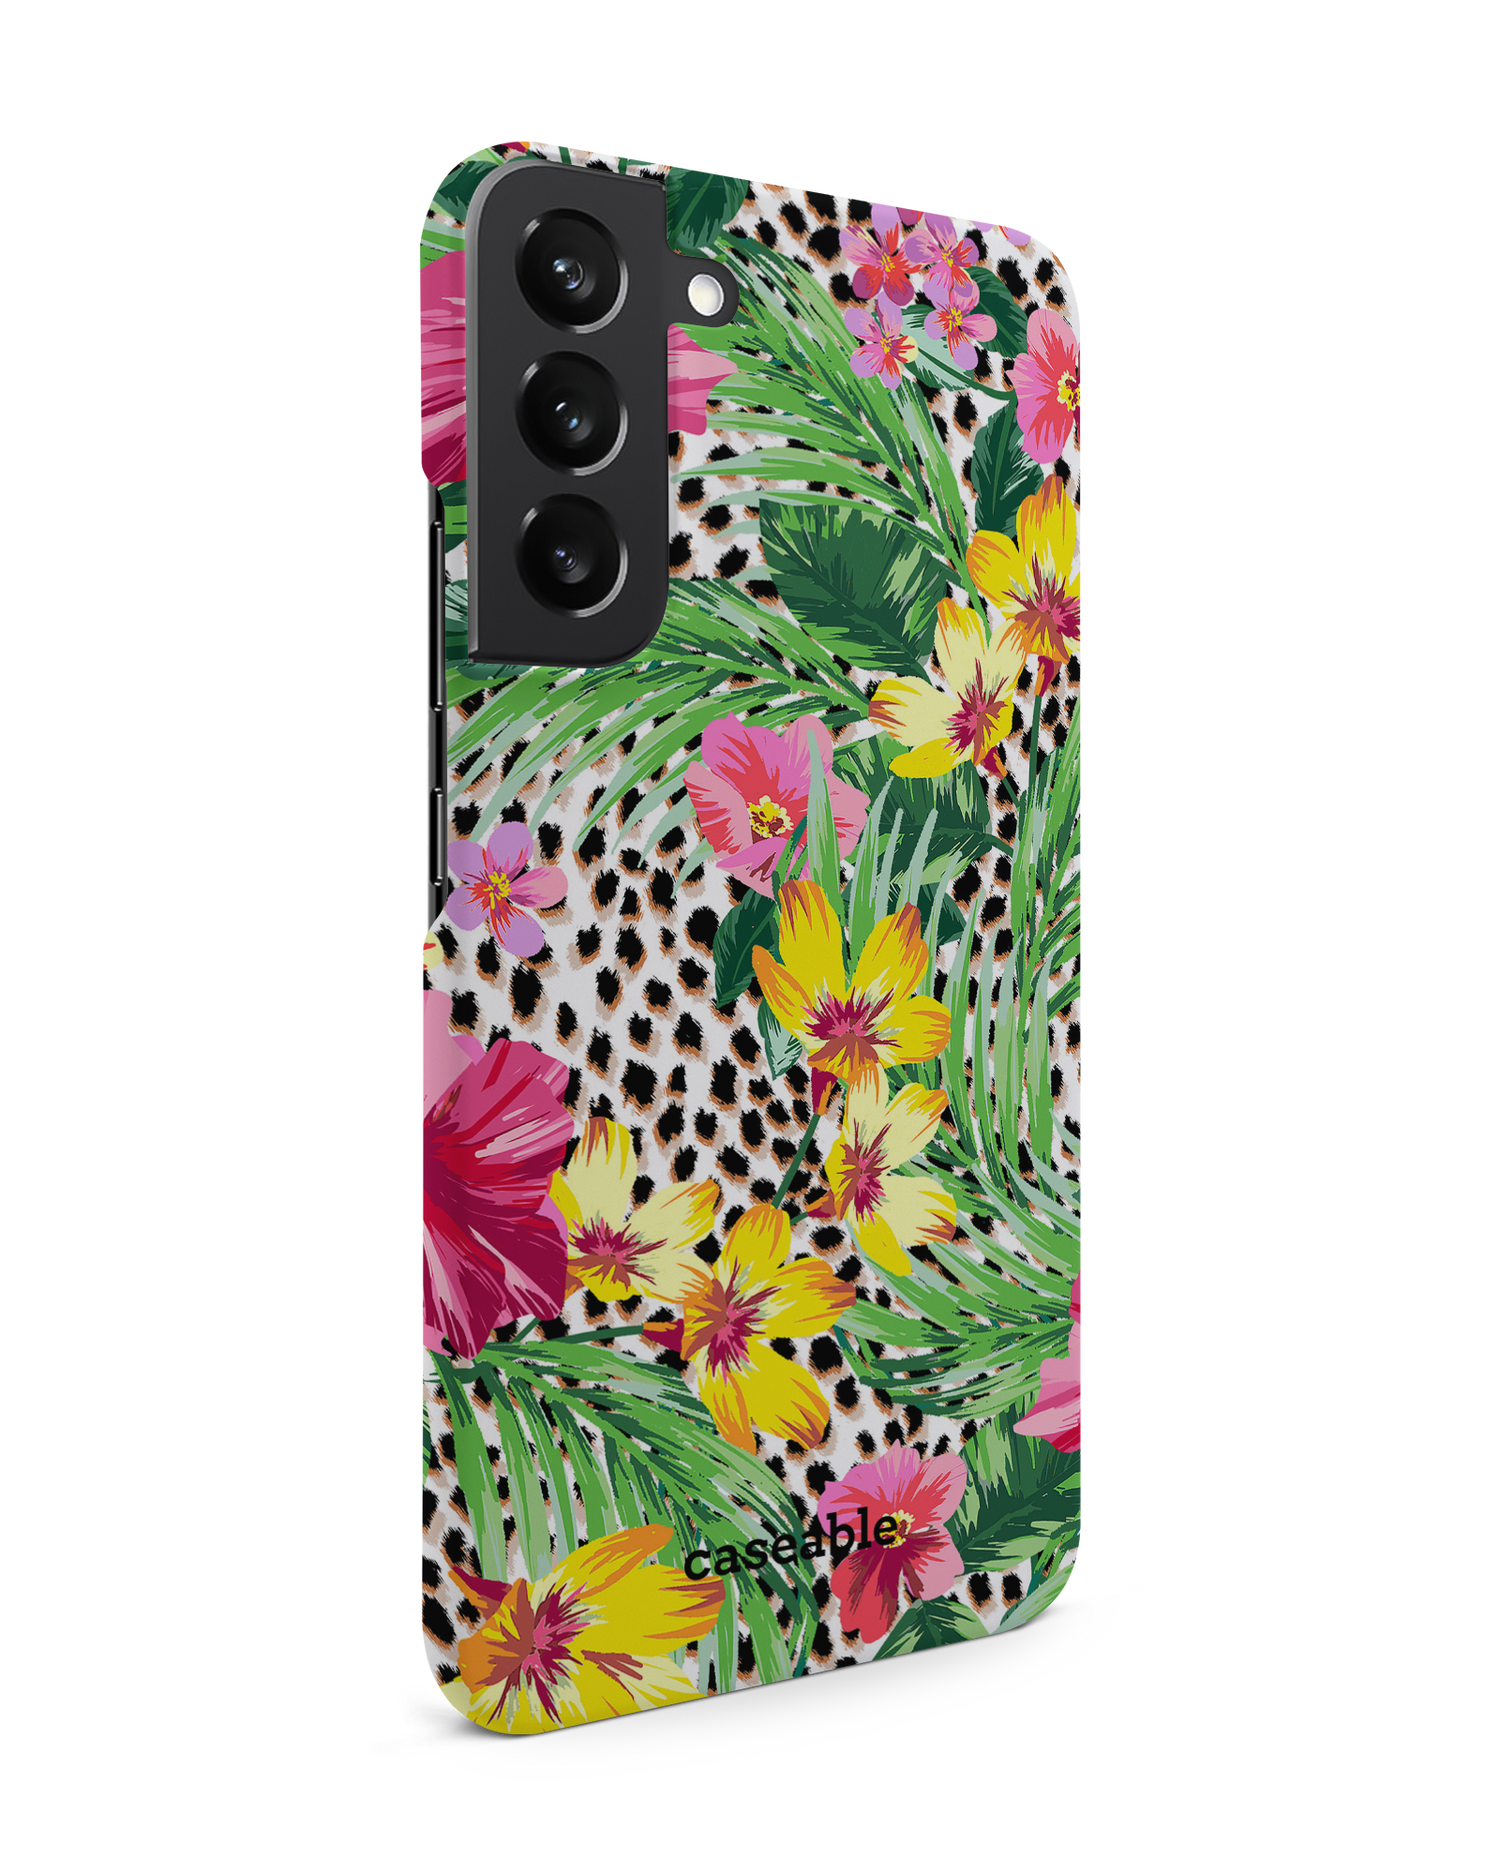 Tropical Cheetah Hard Shell Phone Case Samsung Galaxy S22 Plus 5G: View from the left side